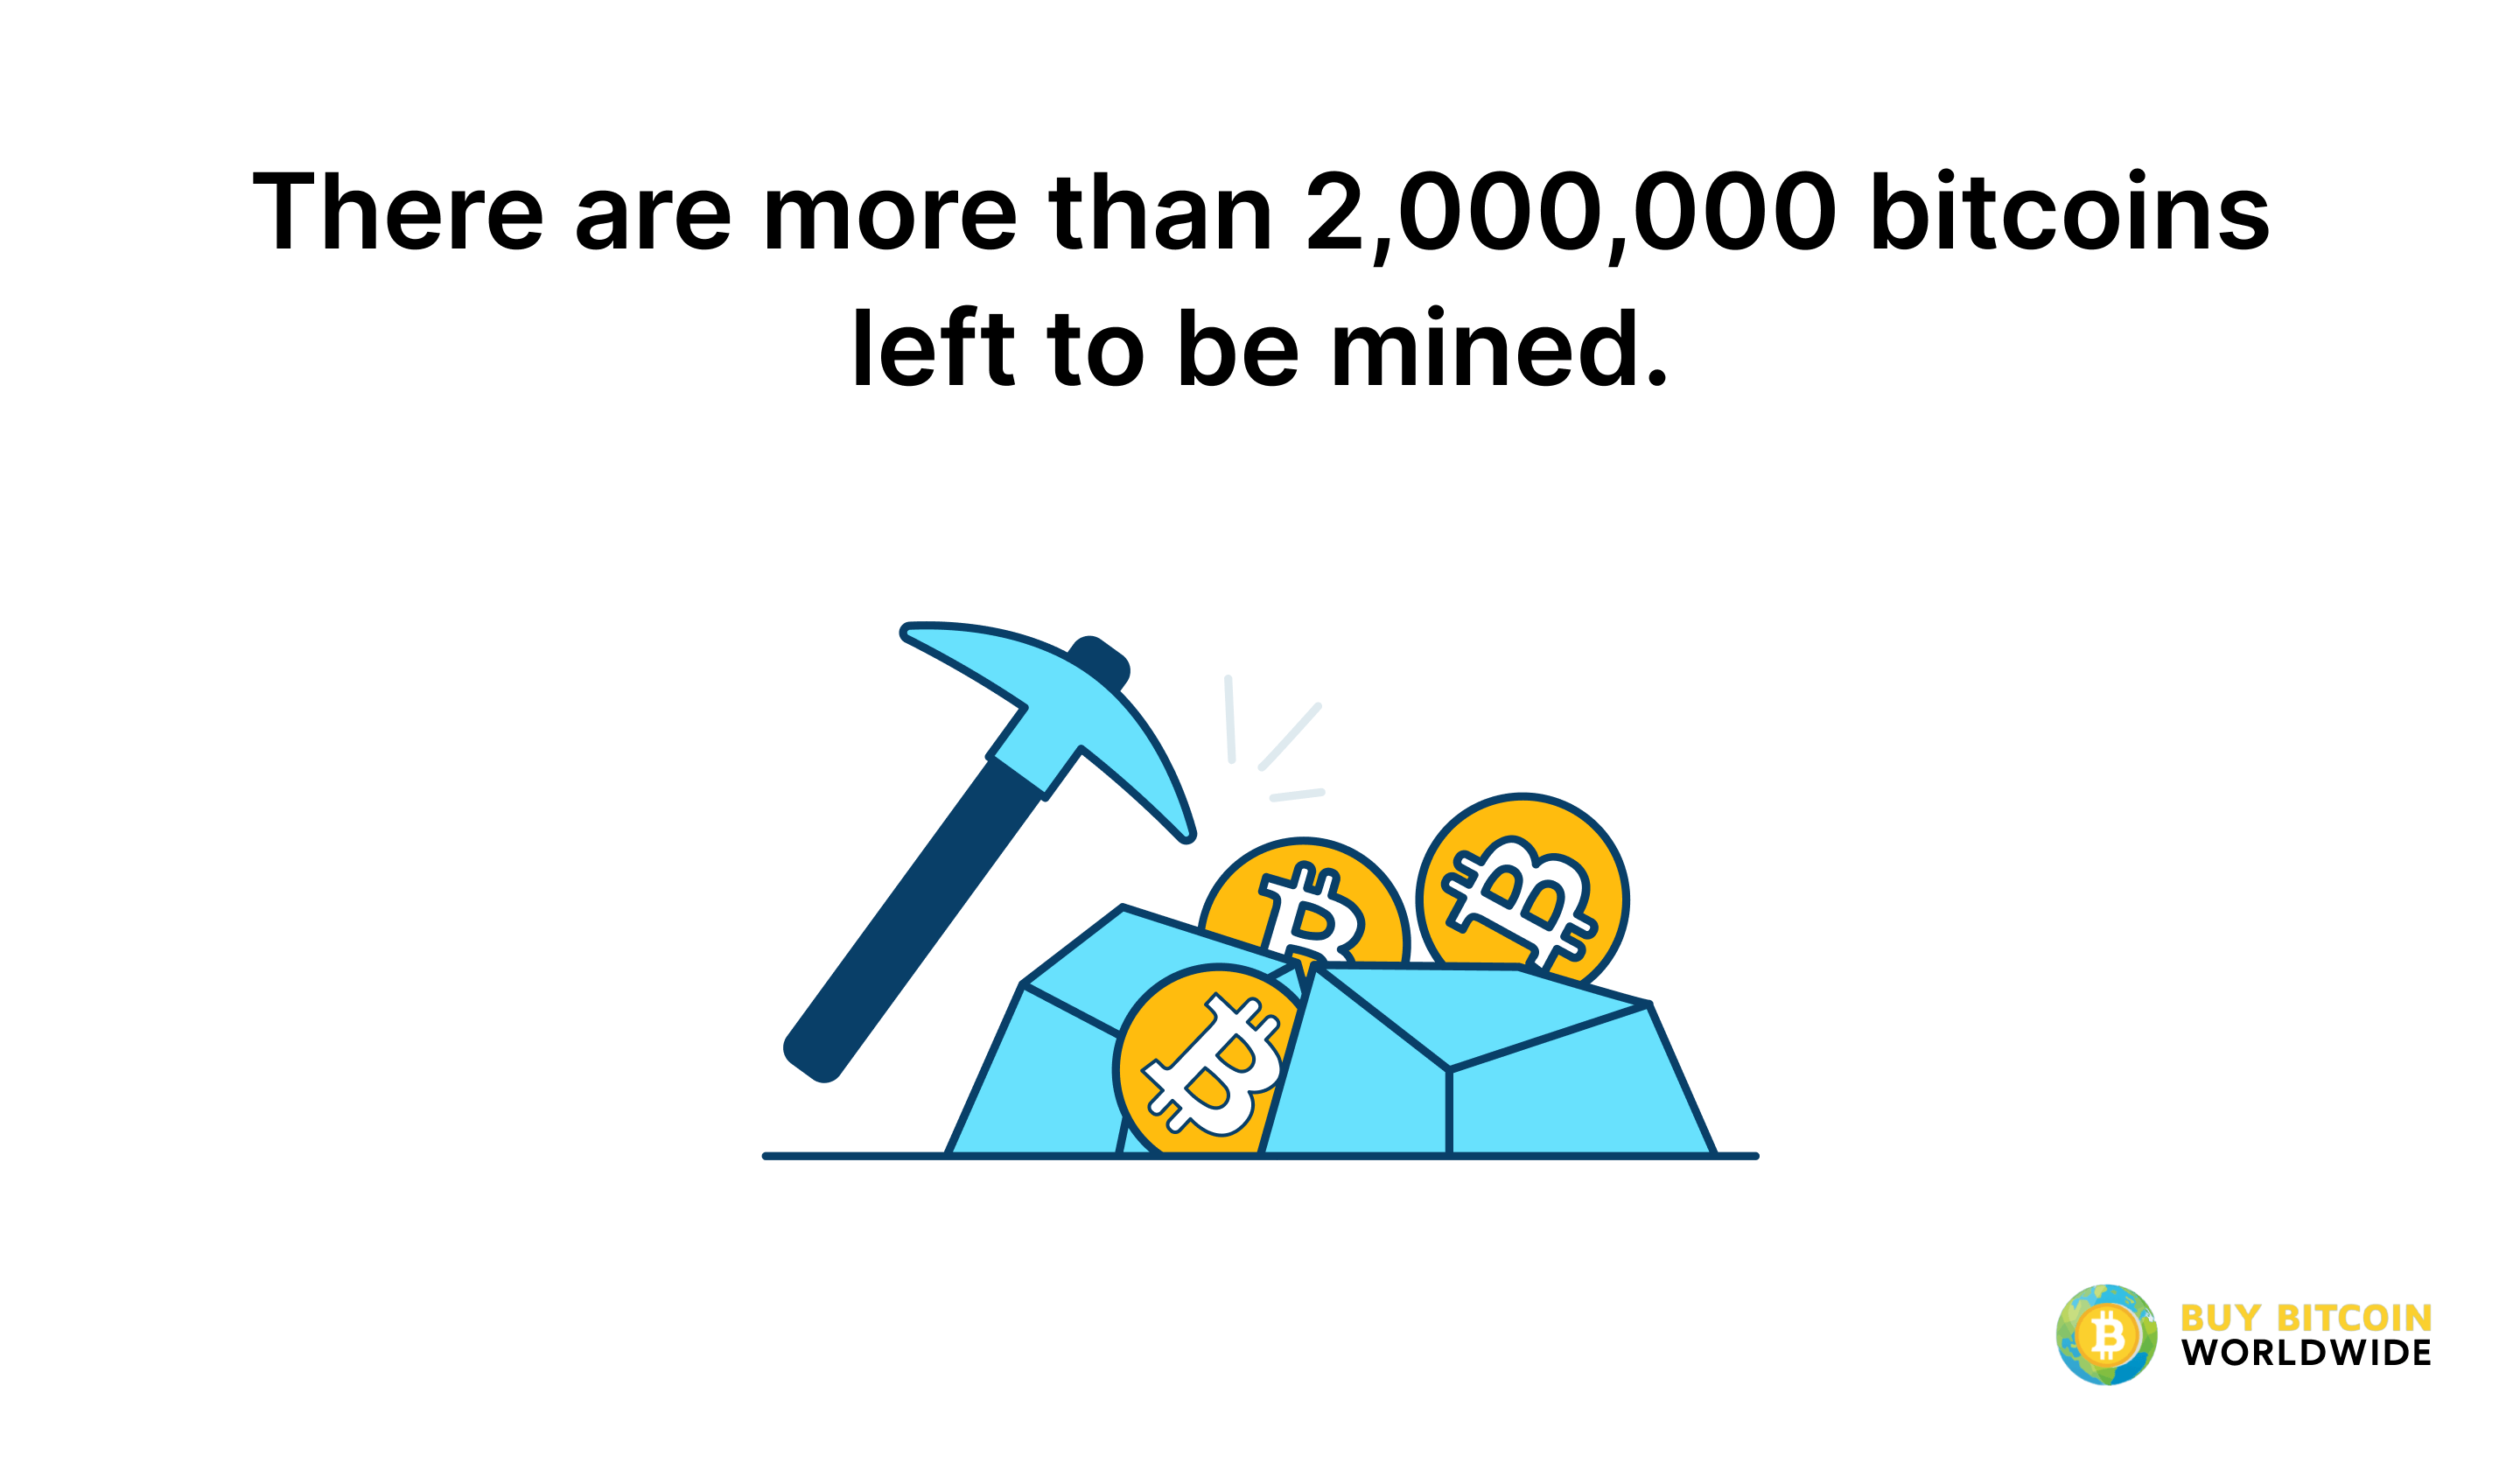 more than 2 million bitcoins are left to be mined